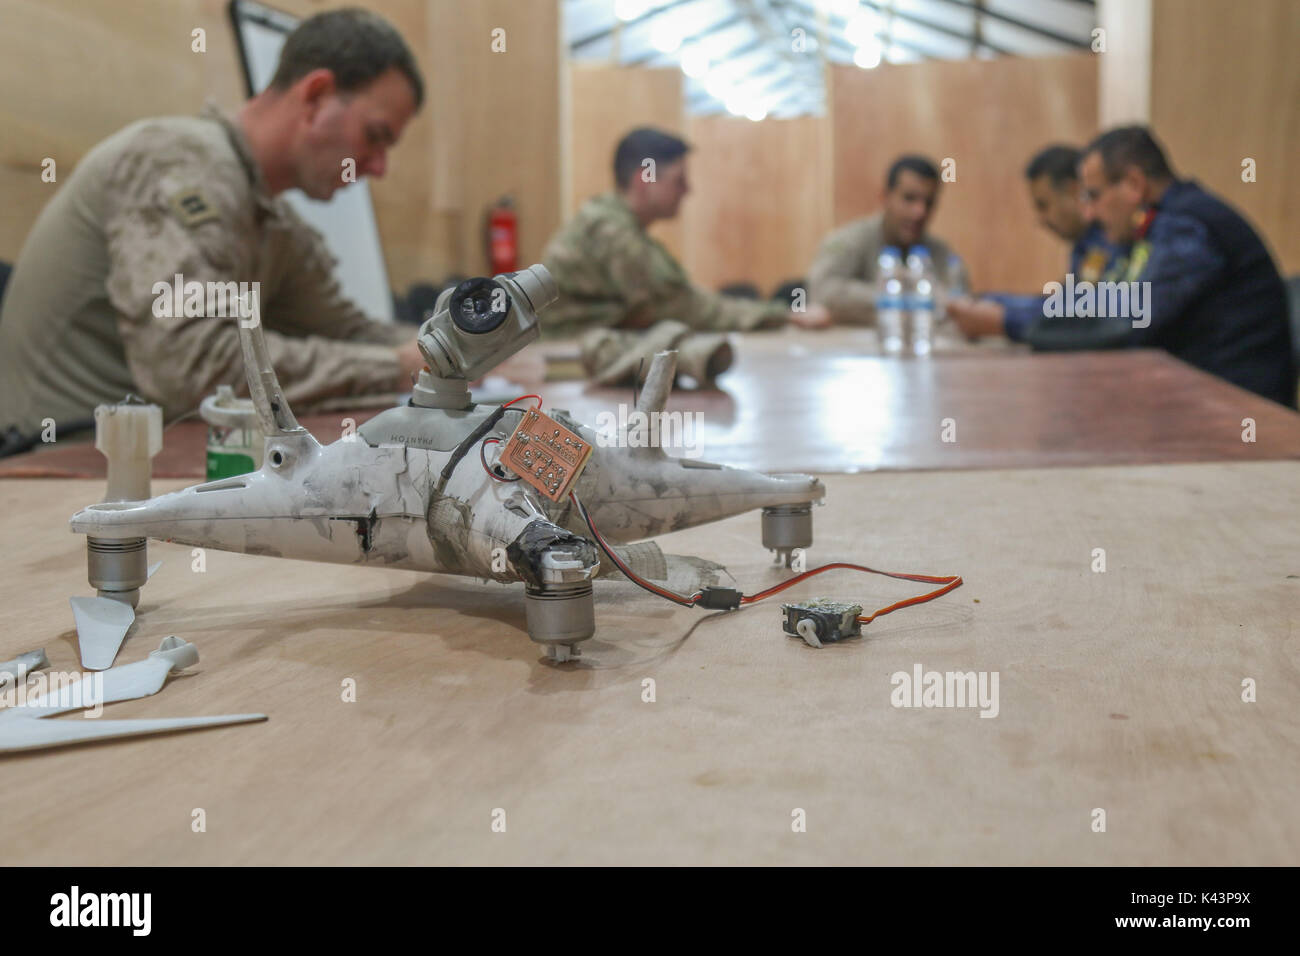 An ISIL unmanned aerial vehicle captured by Iraqi Federal Police sits on a table at the Qayyarah West Airfield Joint Operations Center February 9, 2017 in Mosul, Iraq.  (photo by Jason Hull via Planetpix) Stock Photo